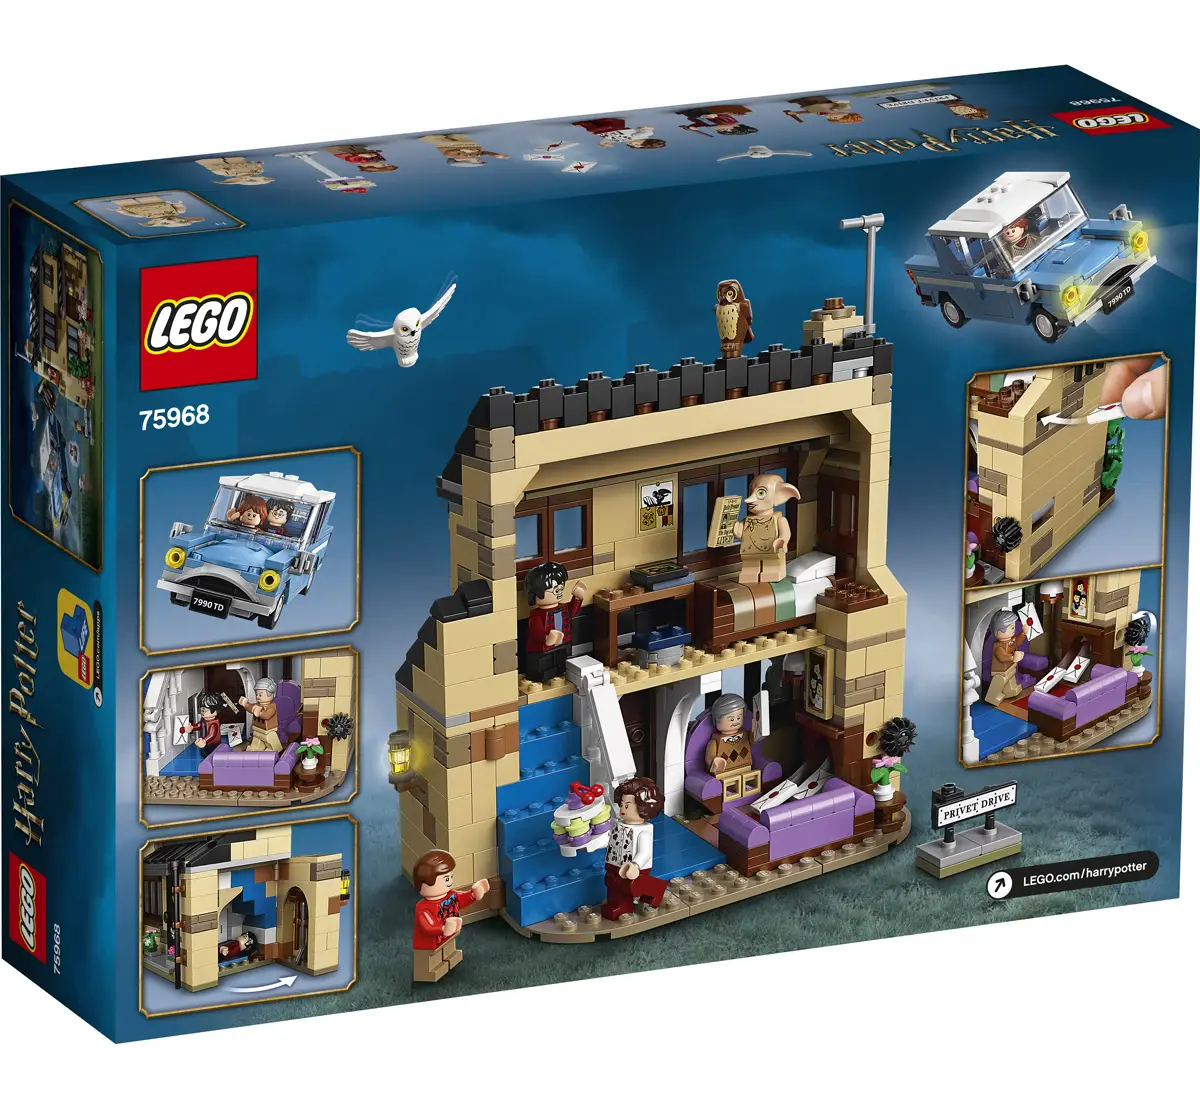 Lego Harry Potter 4 Privet Drive Fun Childrens Building Toy for Kids, Collectible Playsets & Role-Playing Games (797 Pieces)